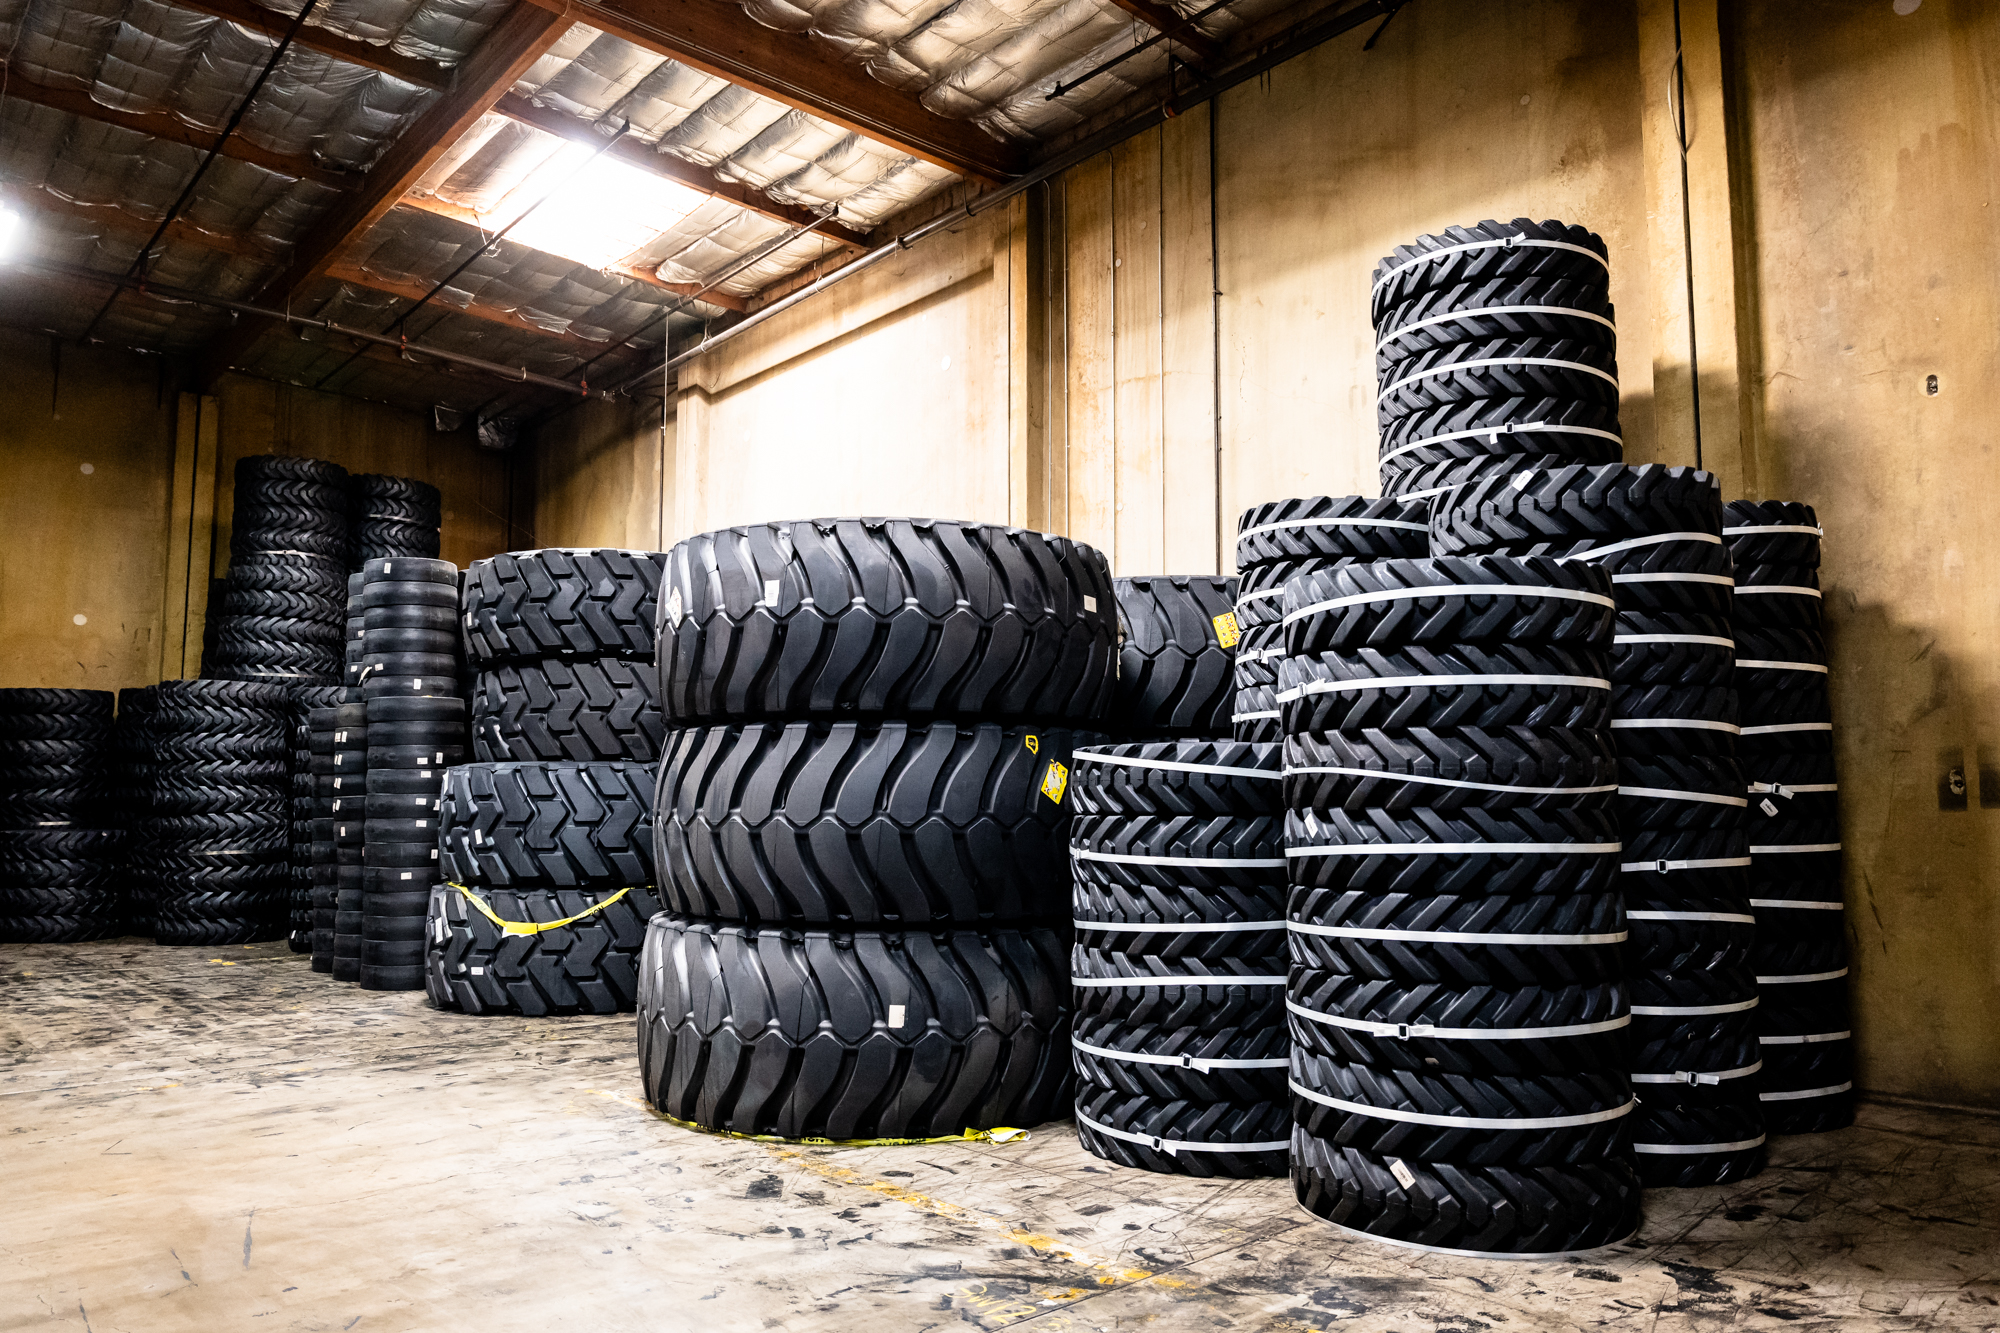 Stacks of large tires